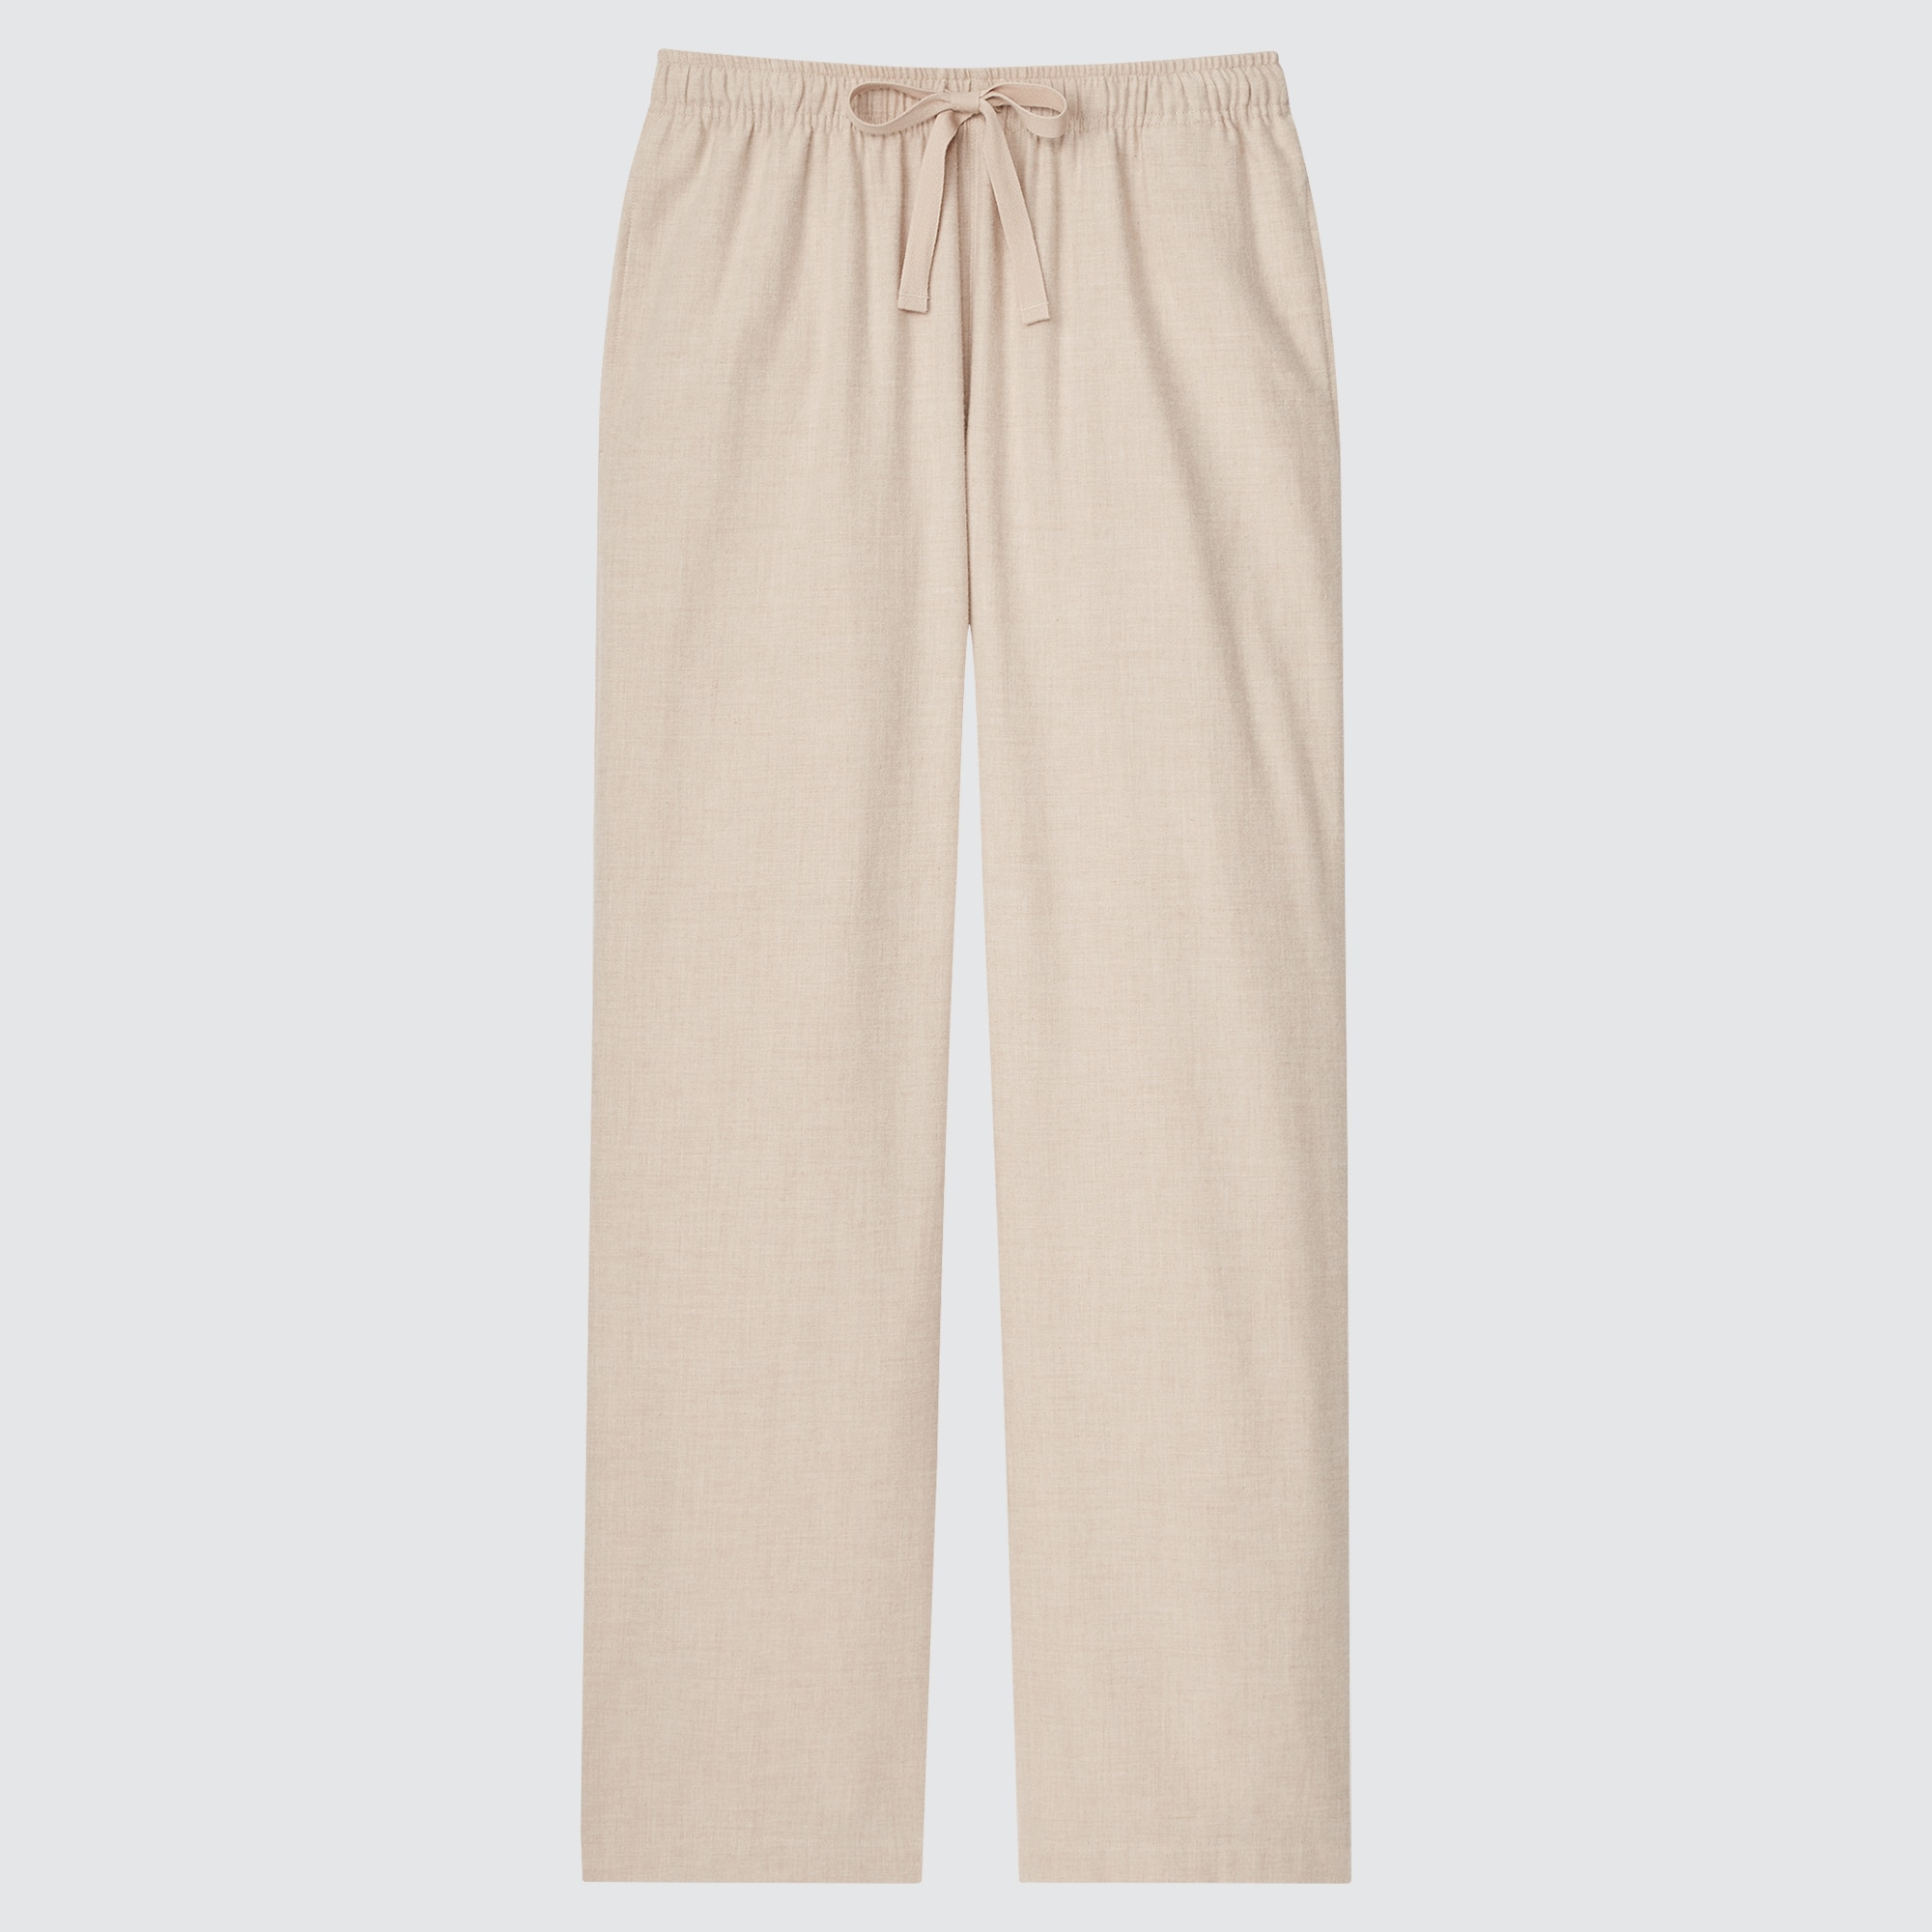 Brand New Uniqlo Linen Cotton Wide Cropped Pants XS 6 Sold Out Beige  eBay